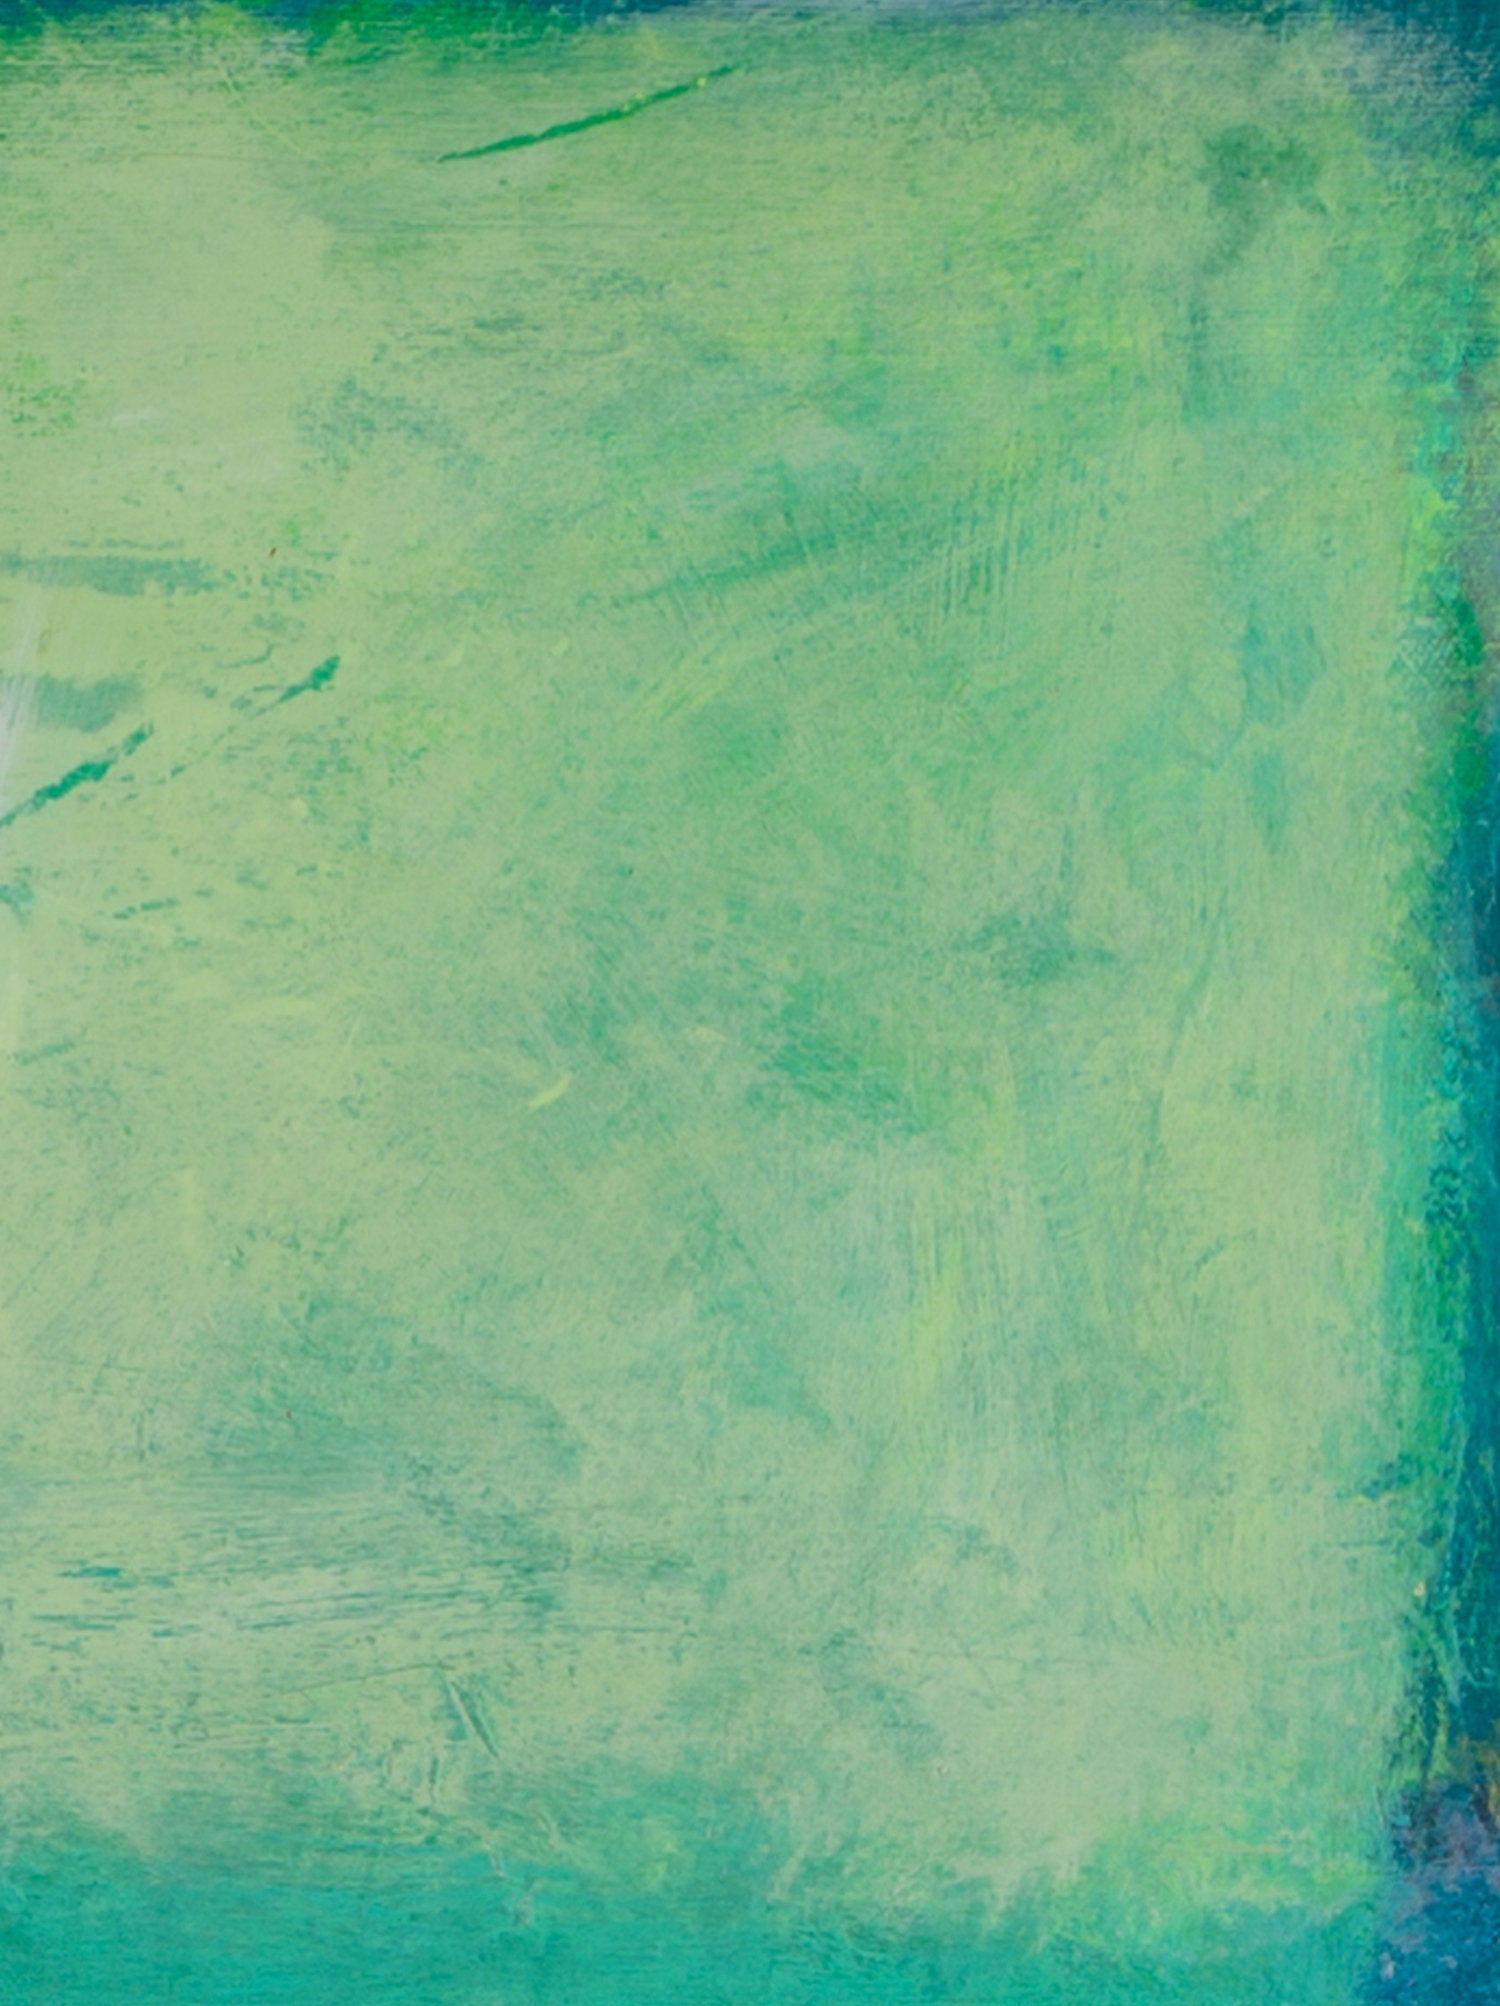 Green Abstract Landscape Painting Blue and Turquoise Original Painting on Canvas Contemporary Abstract Art Wall Decor Texture Painting - camilomattis.com